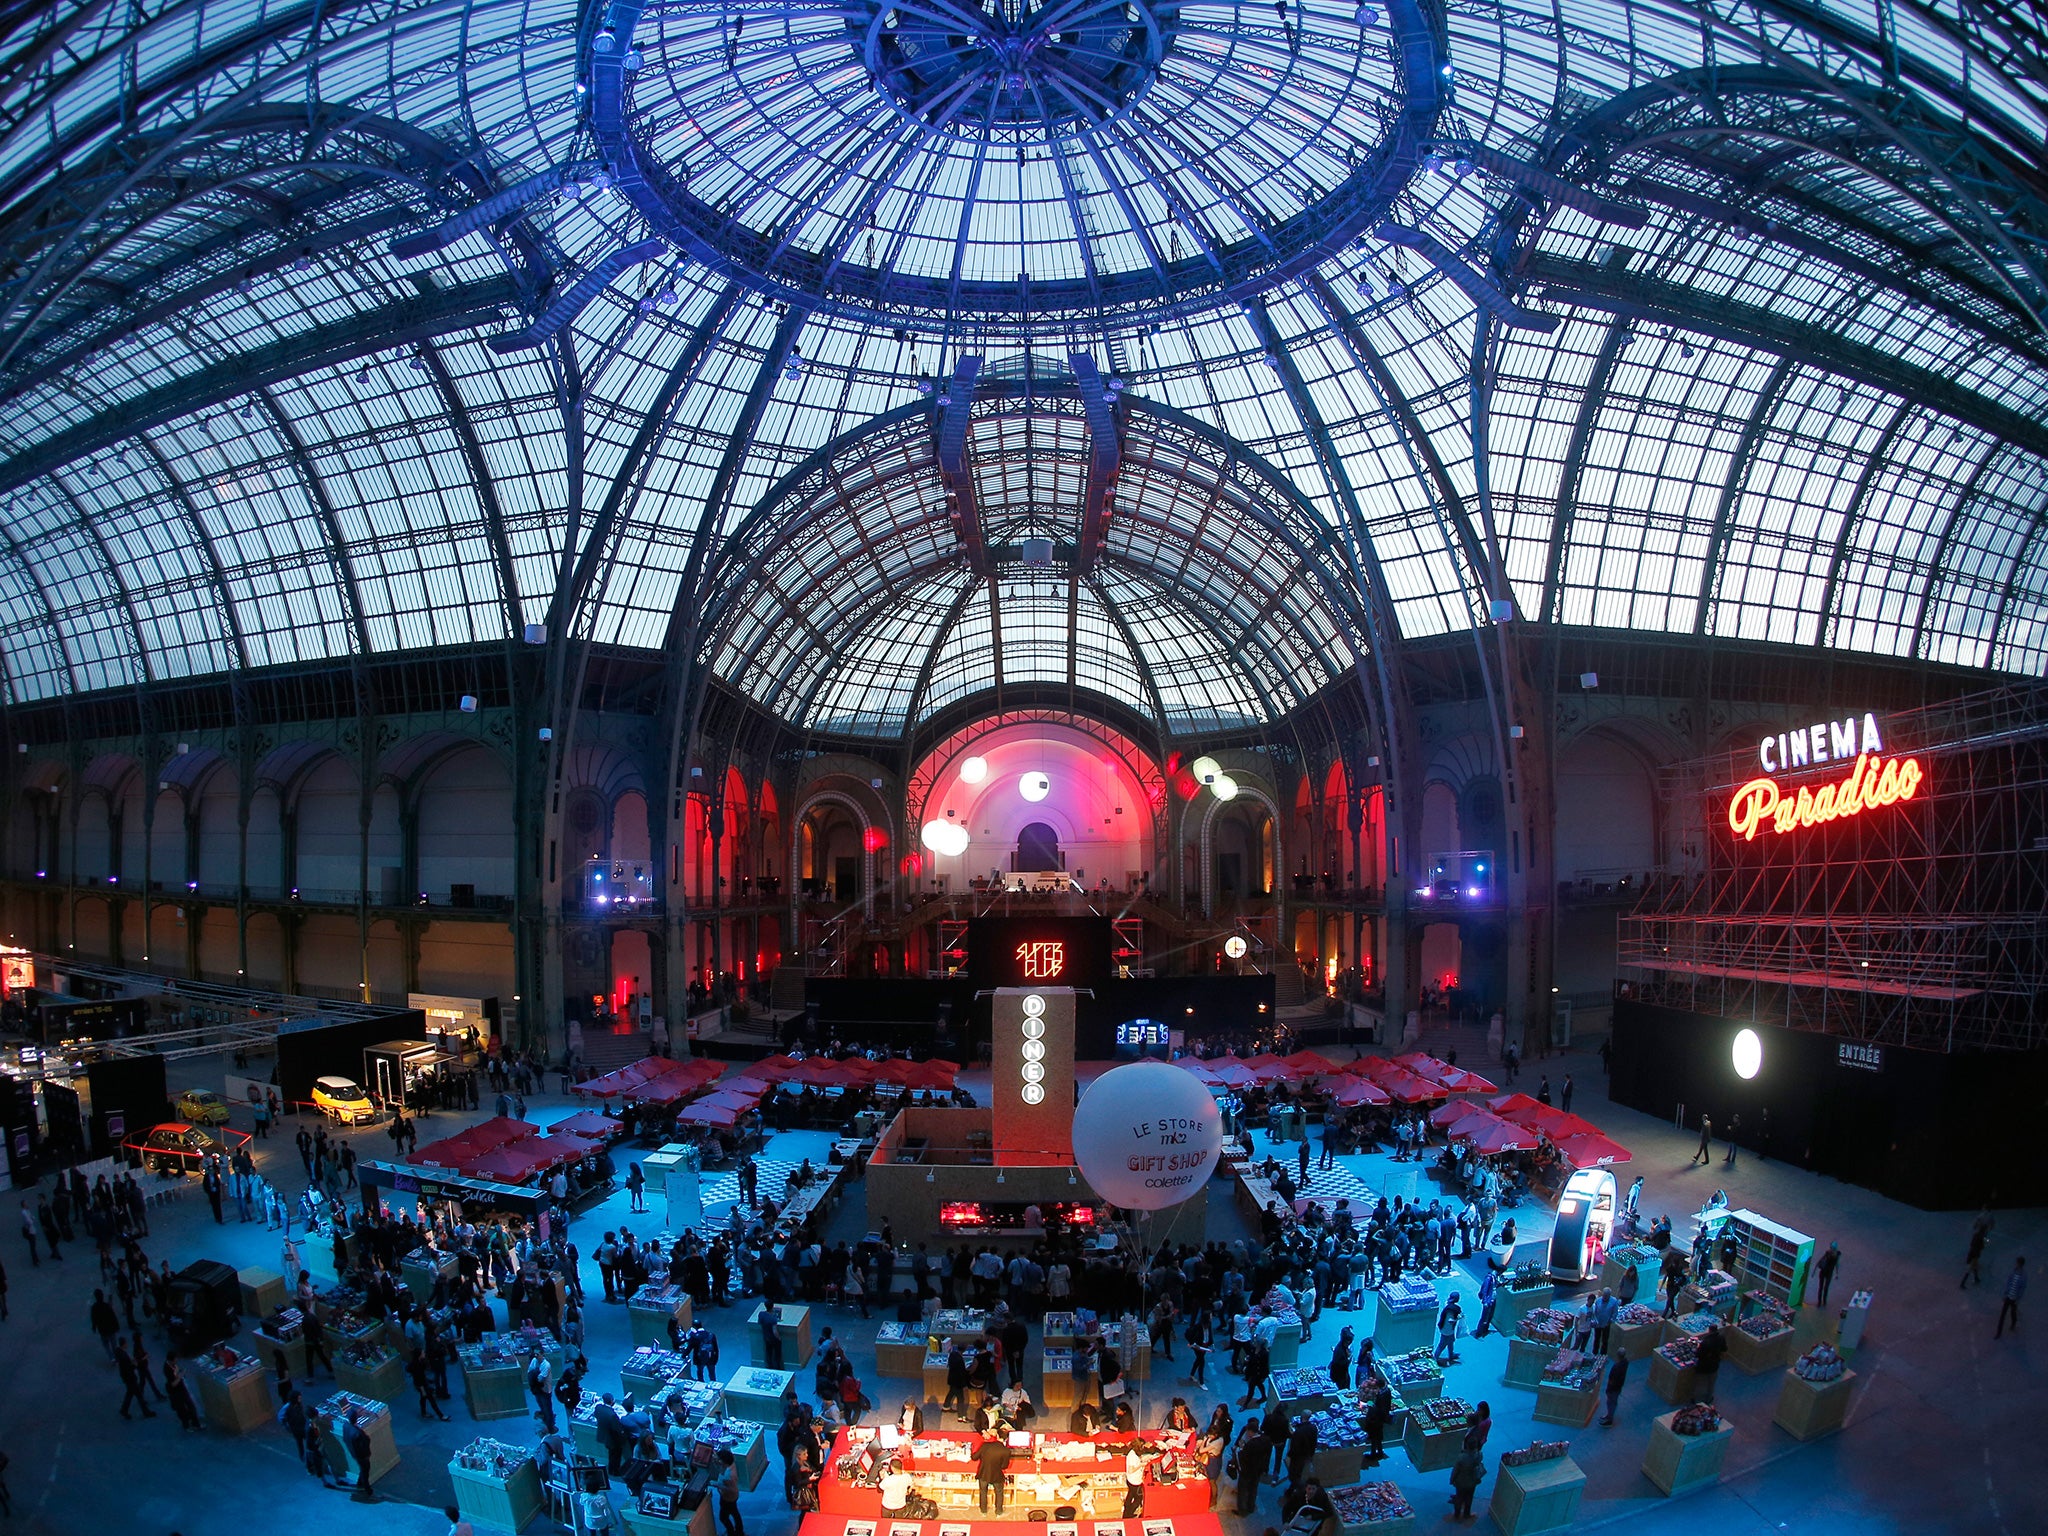 The Grand Palais in Paris will be transformed into a 4,000-seat cinema, with 44 double beds at the front